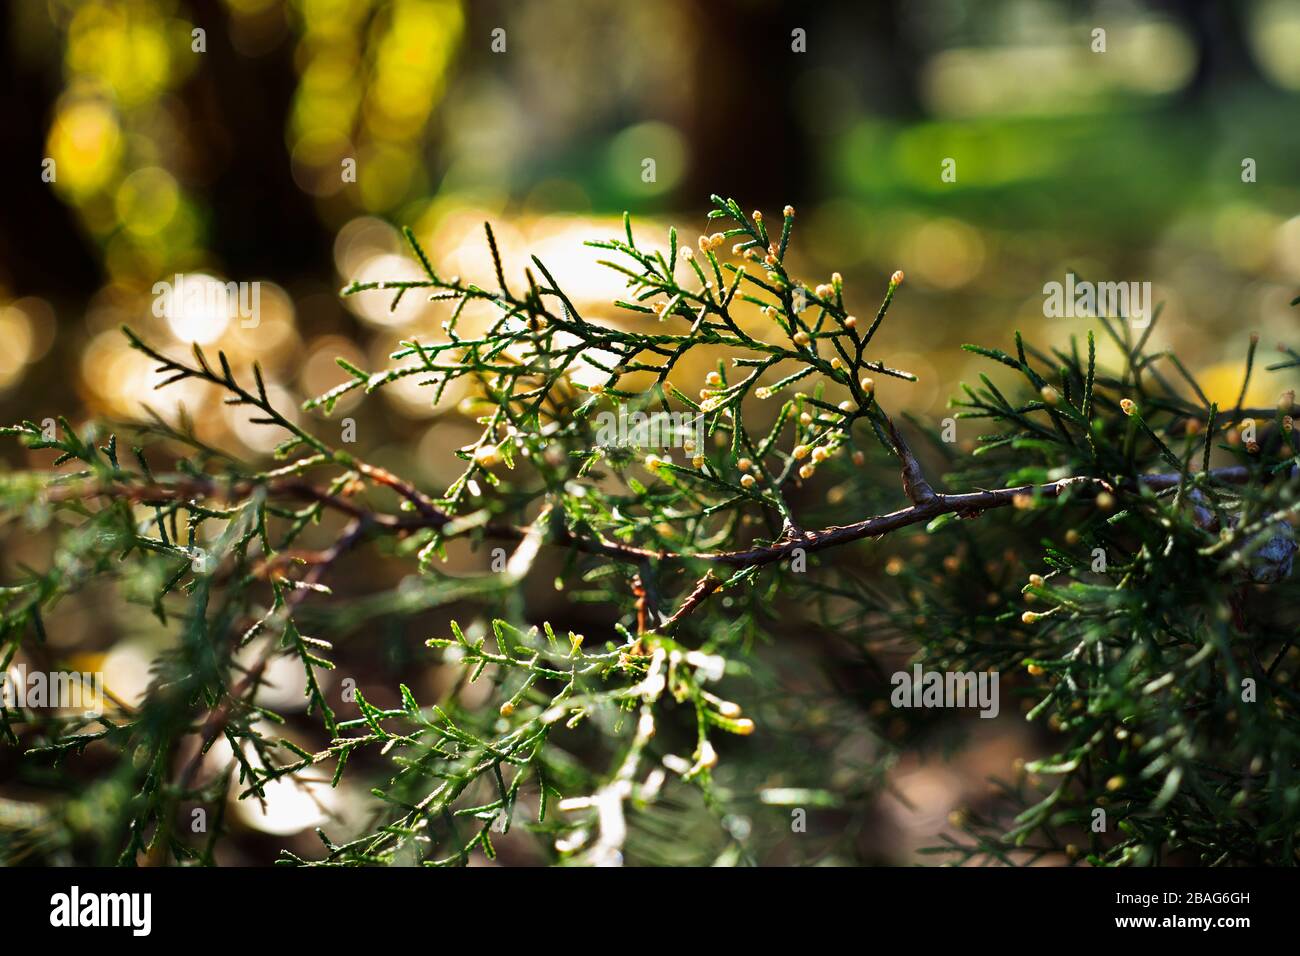 Detail of Mexican white cedar -cupressus lusitanica or Benthamil cypress -evergreen conifer tree foliage and cones Stock Photo